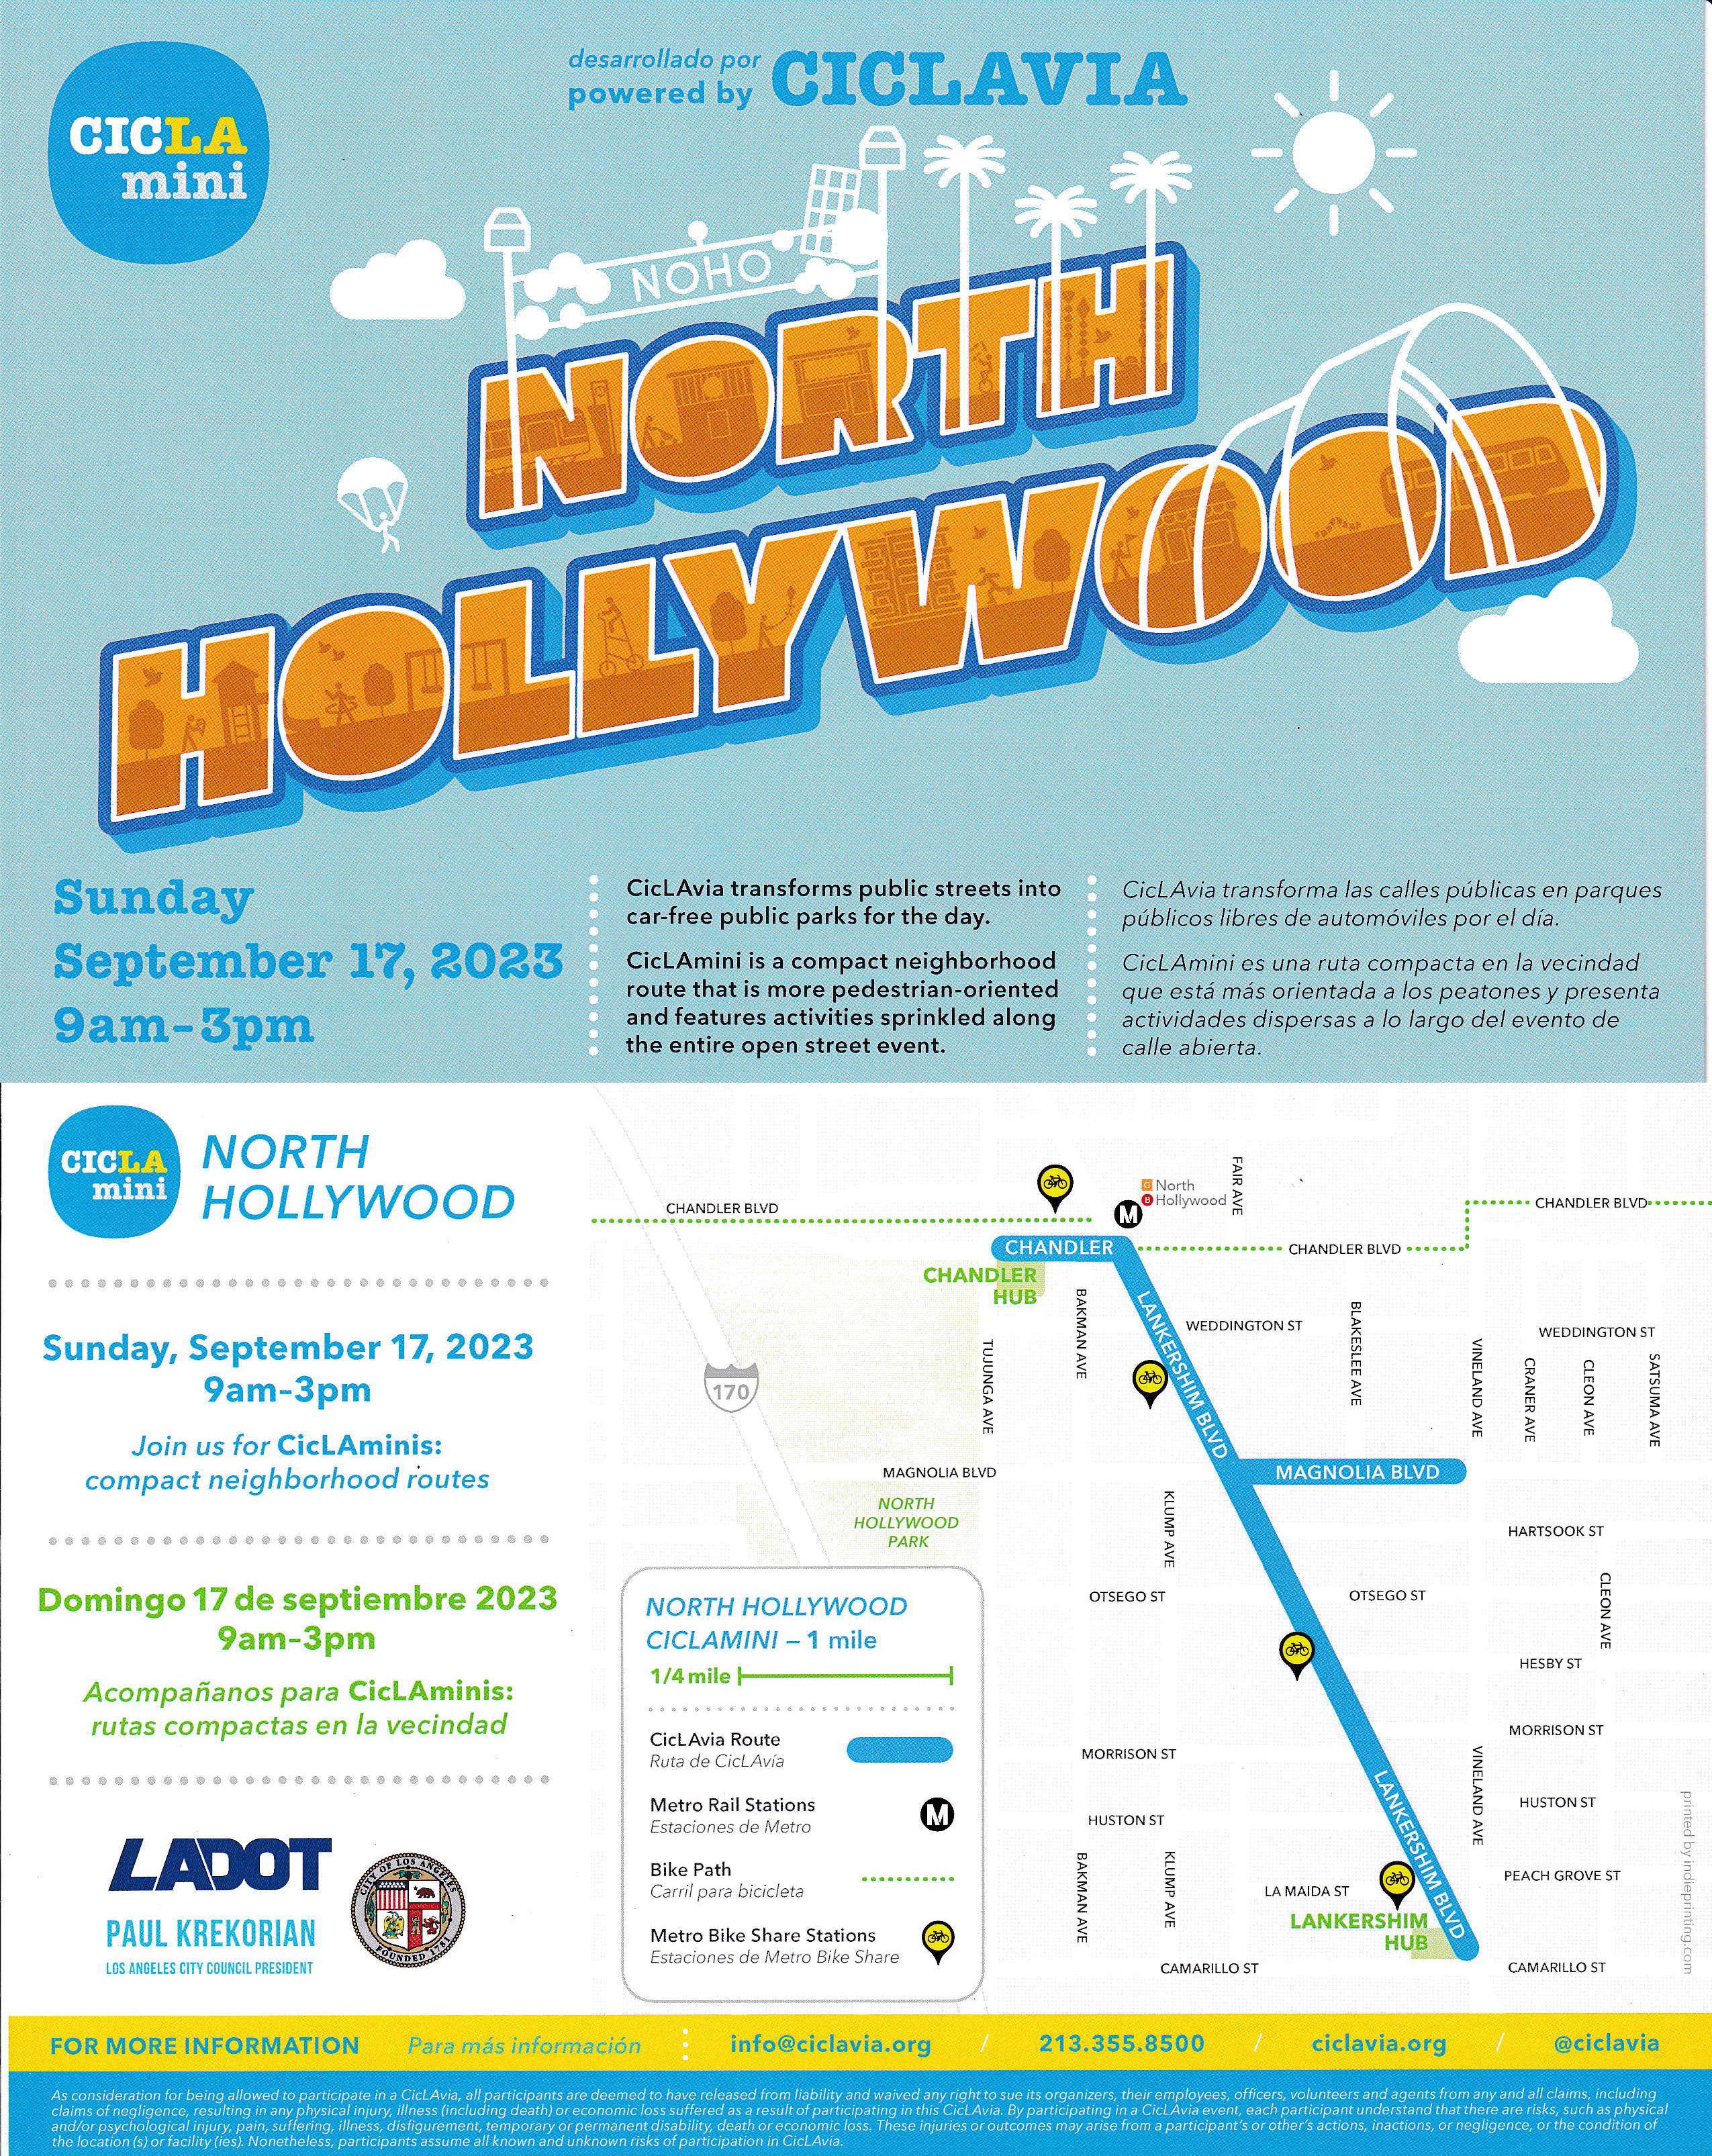 CICLAVIA North Hollywood 9/17/23 9am-3pm click for details